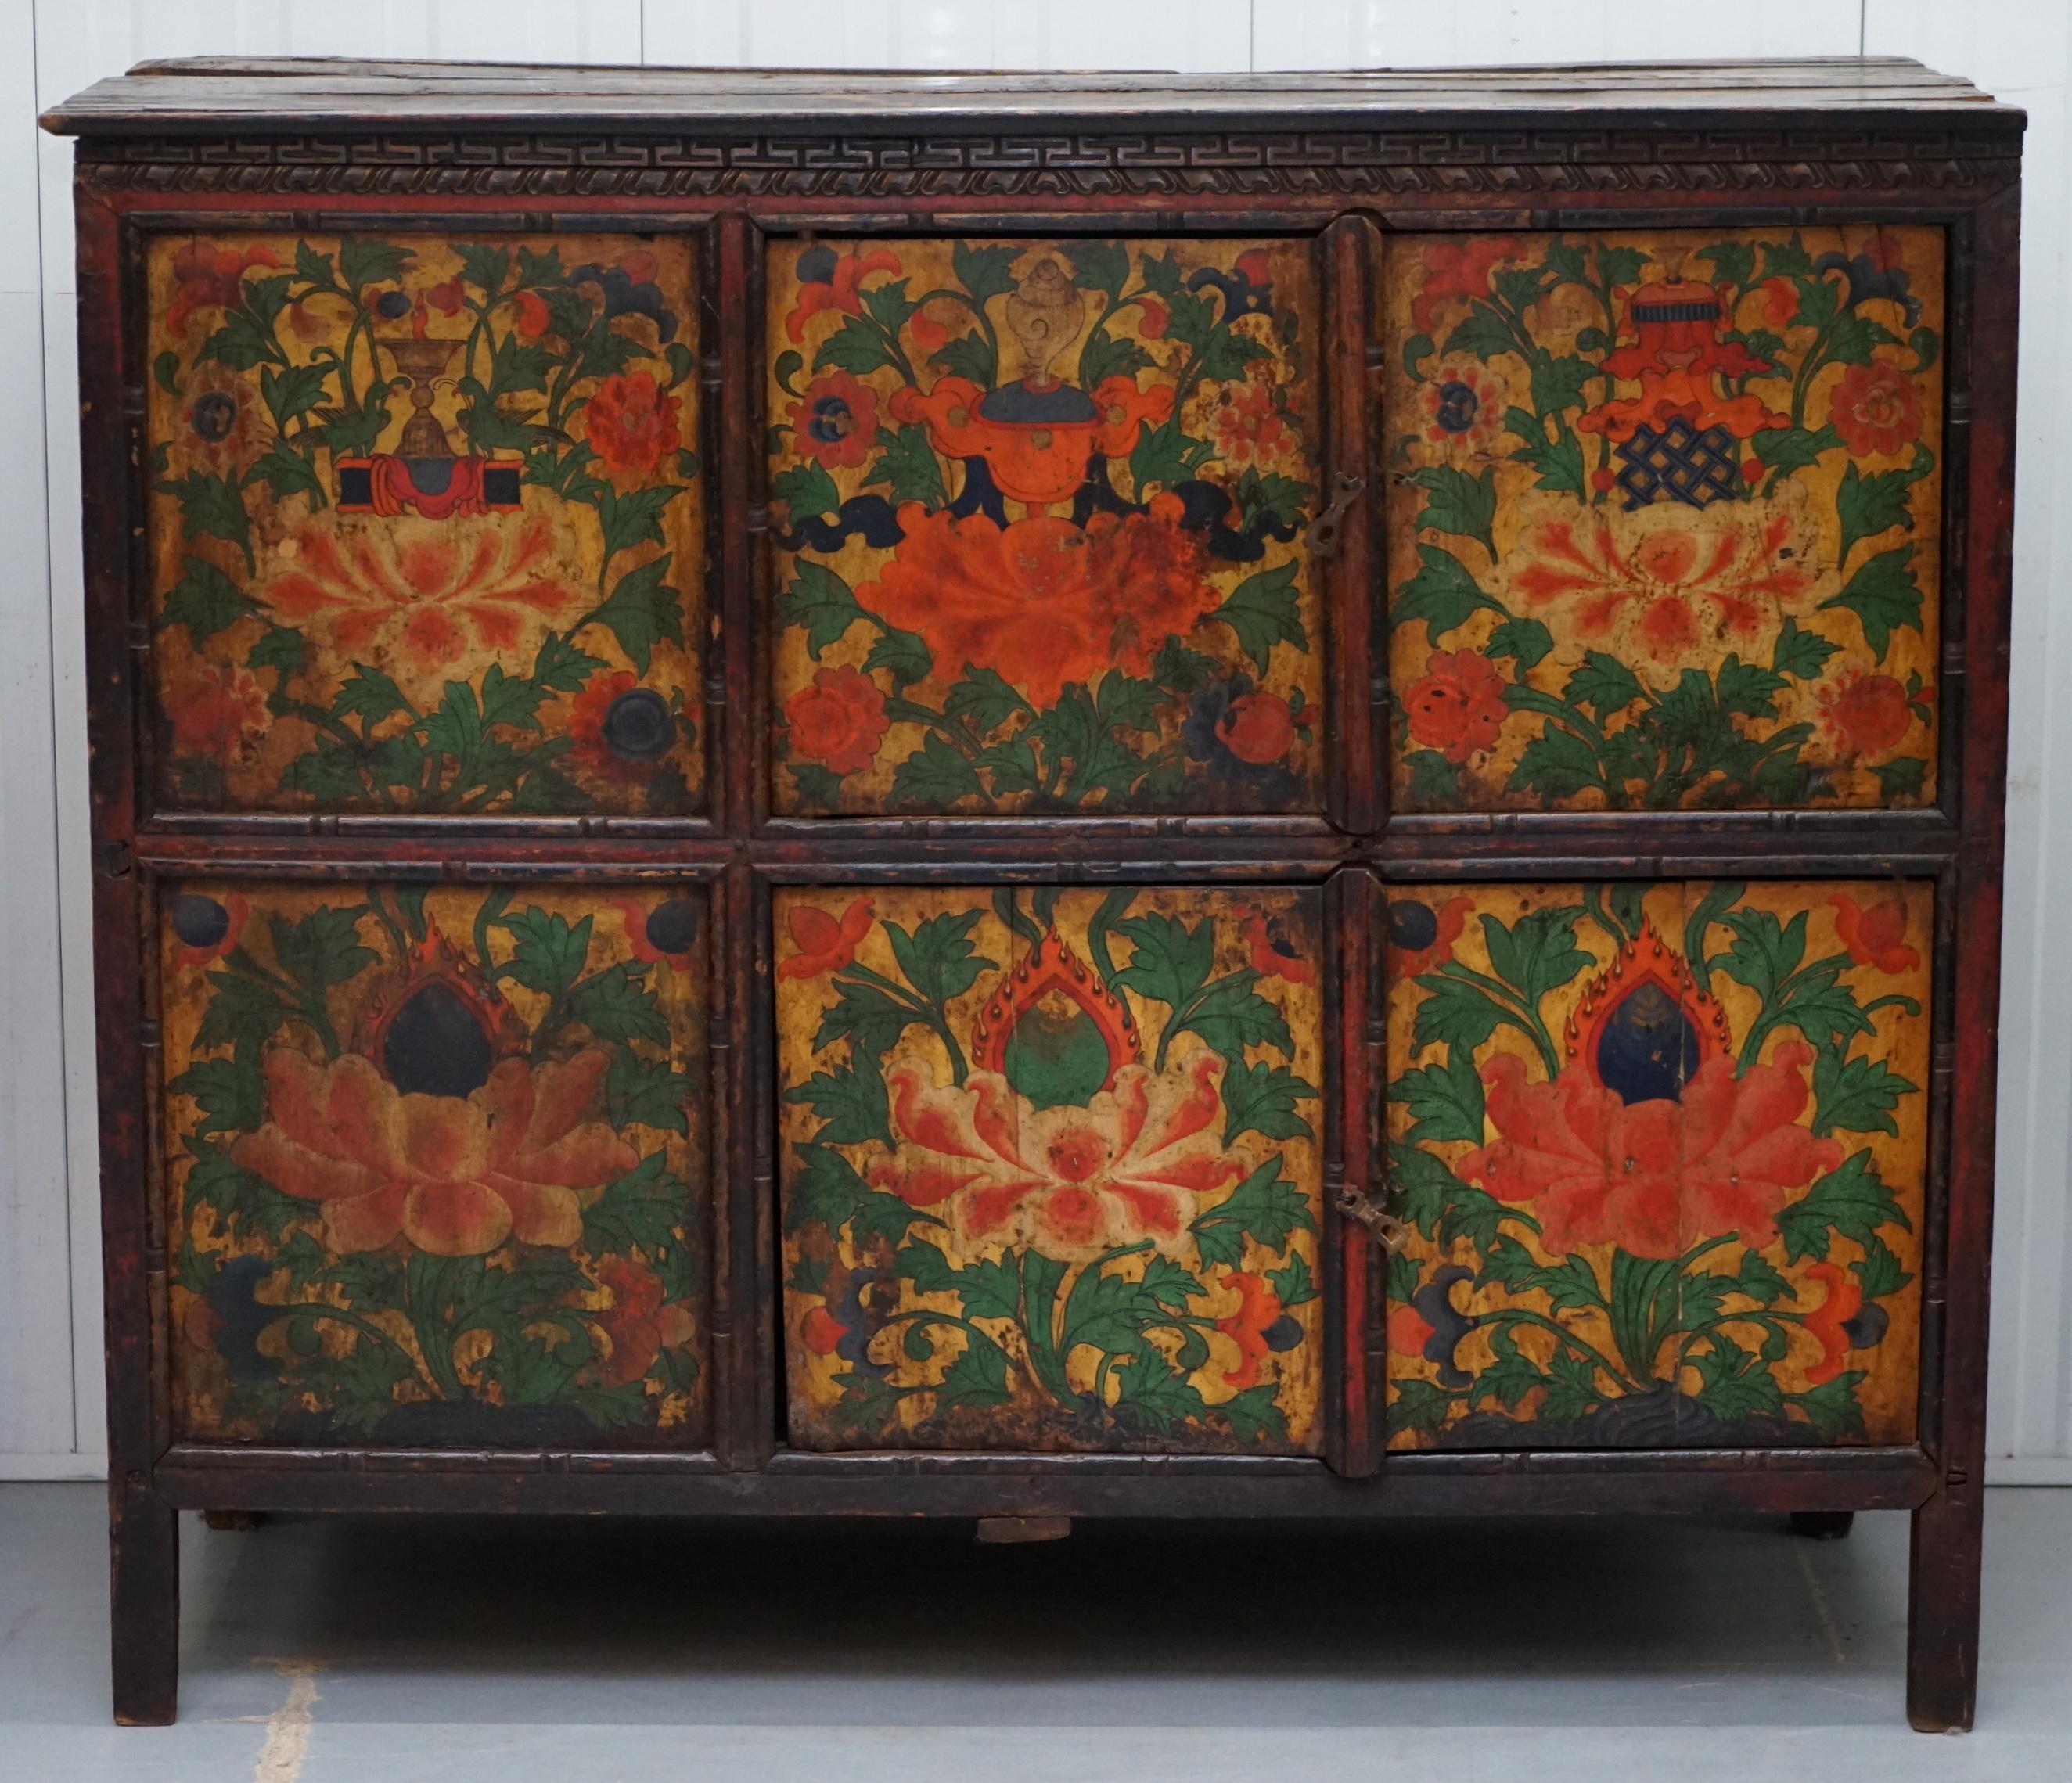 We are delighted to offer for sale this stunning 19th century Tibetan hand paint alter cabinet depicting birds and flowers

These cabinets are constructed from cedar or pine and decorated in the traditional Tibetan colours. They were often used as